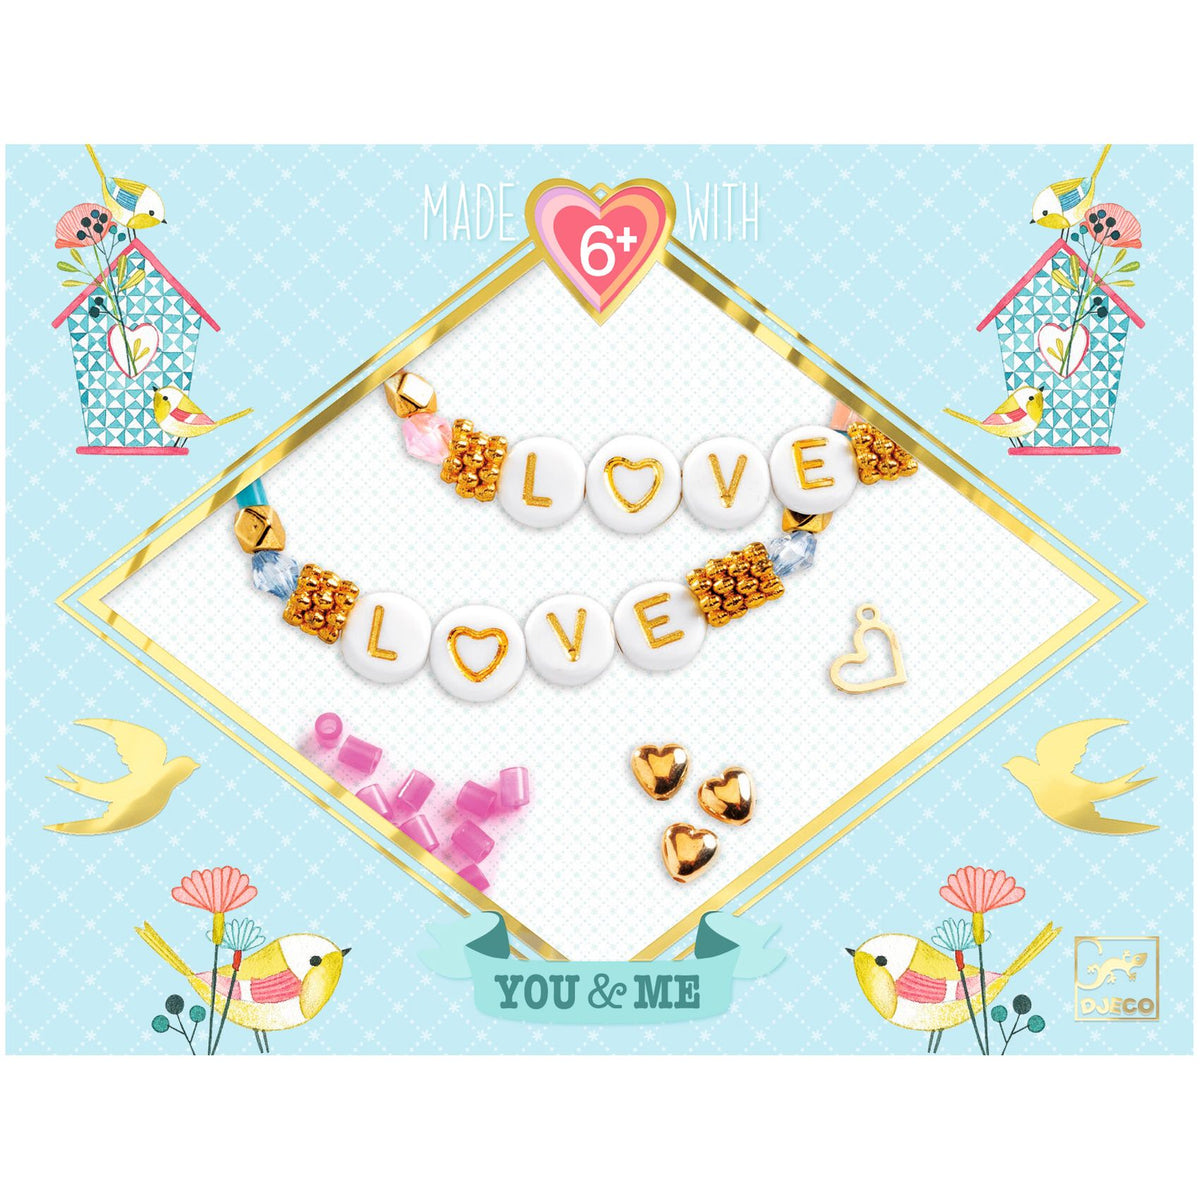 Love Letter Jewelry Making Kit Cover